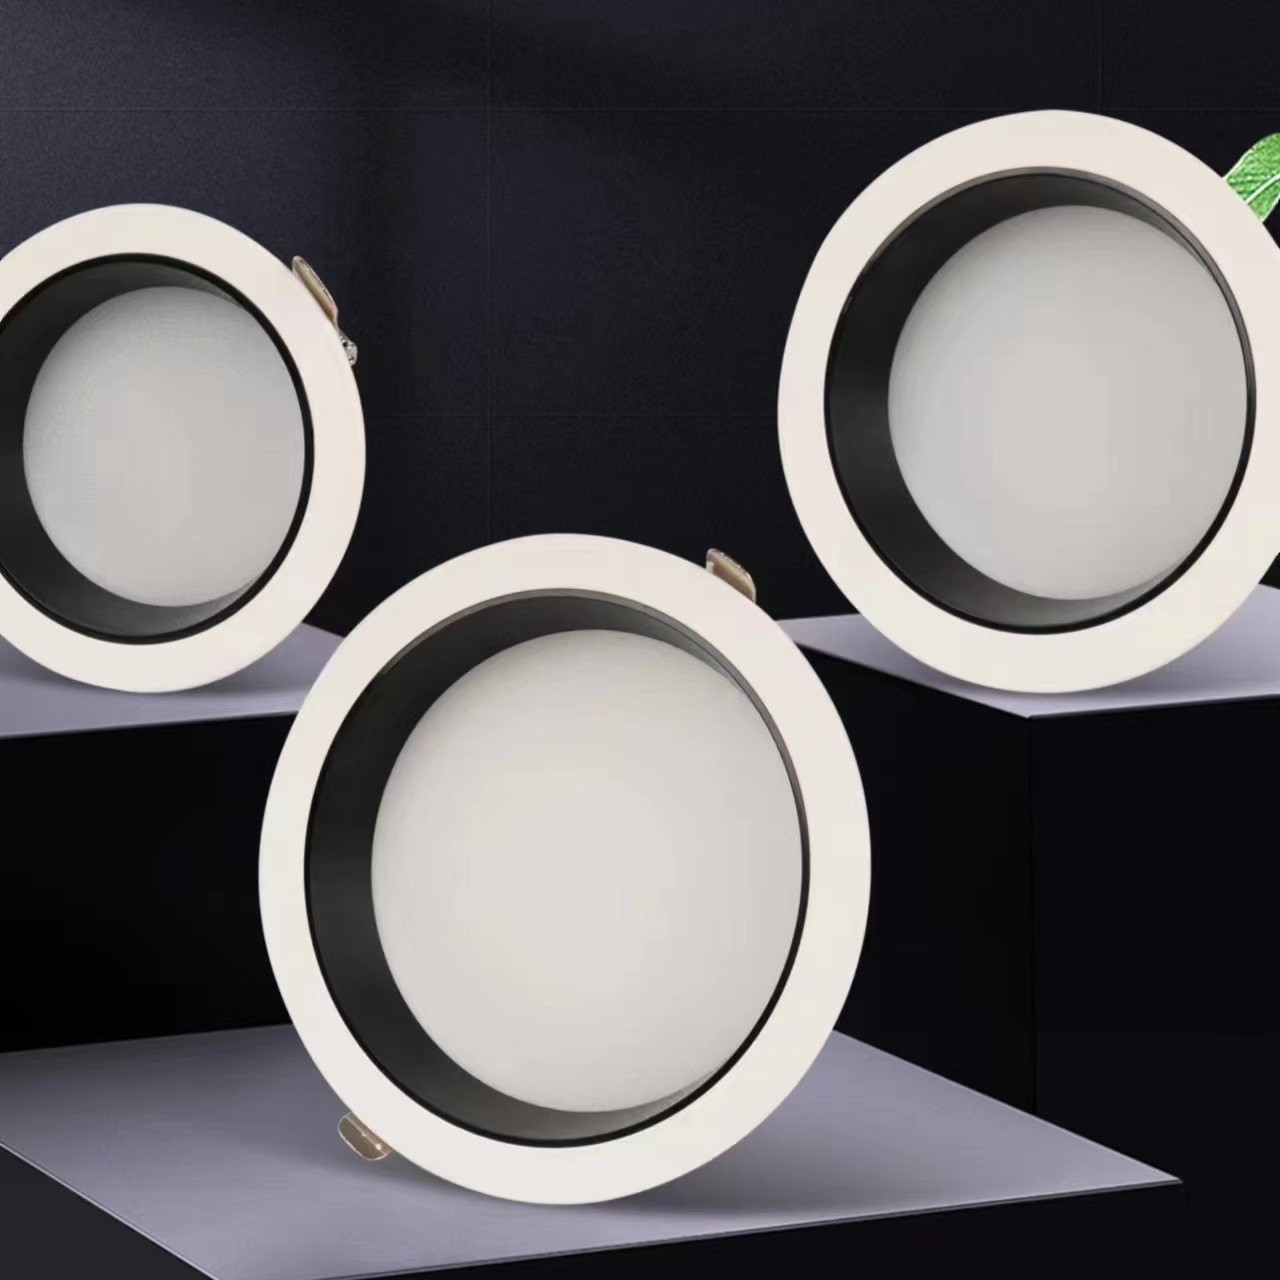 All aluminum material has a long lifespan and good heat dissipation. Deep cup anti glare downlight